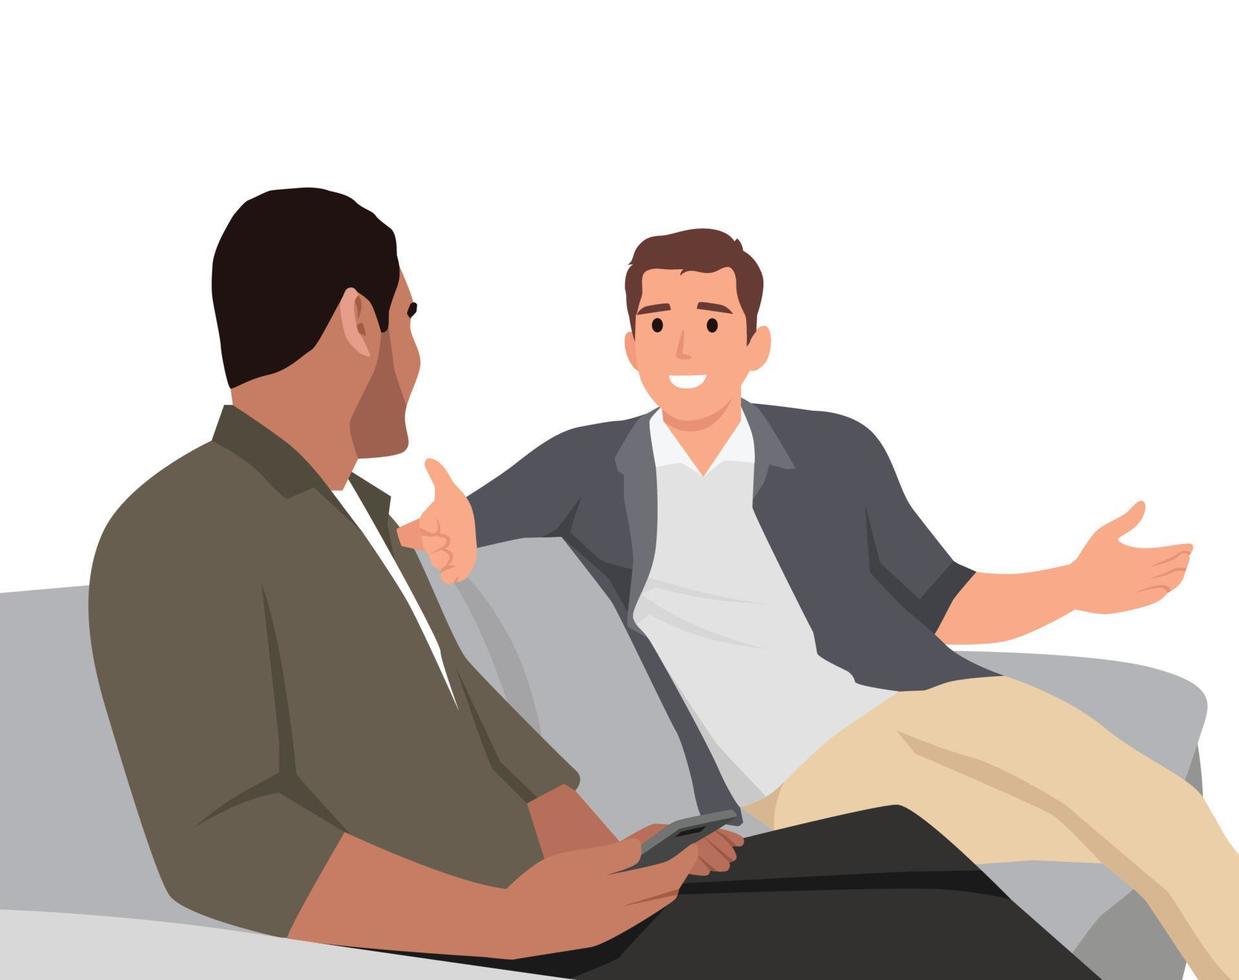 Two people discussing business investment on the sofa vector